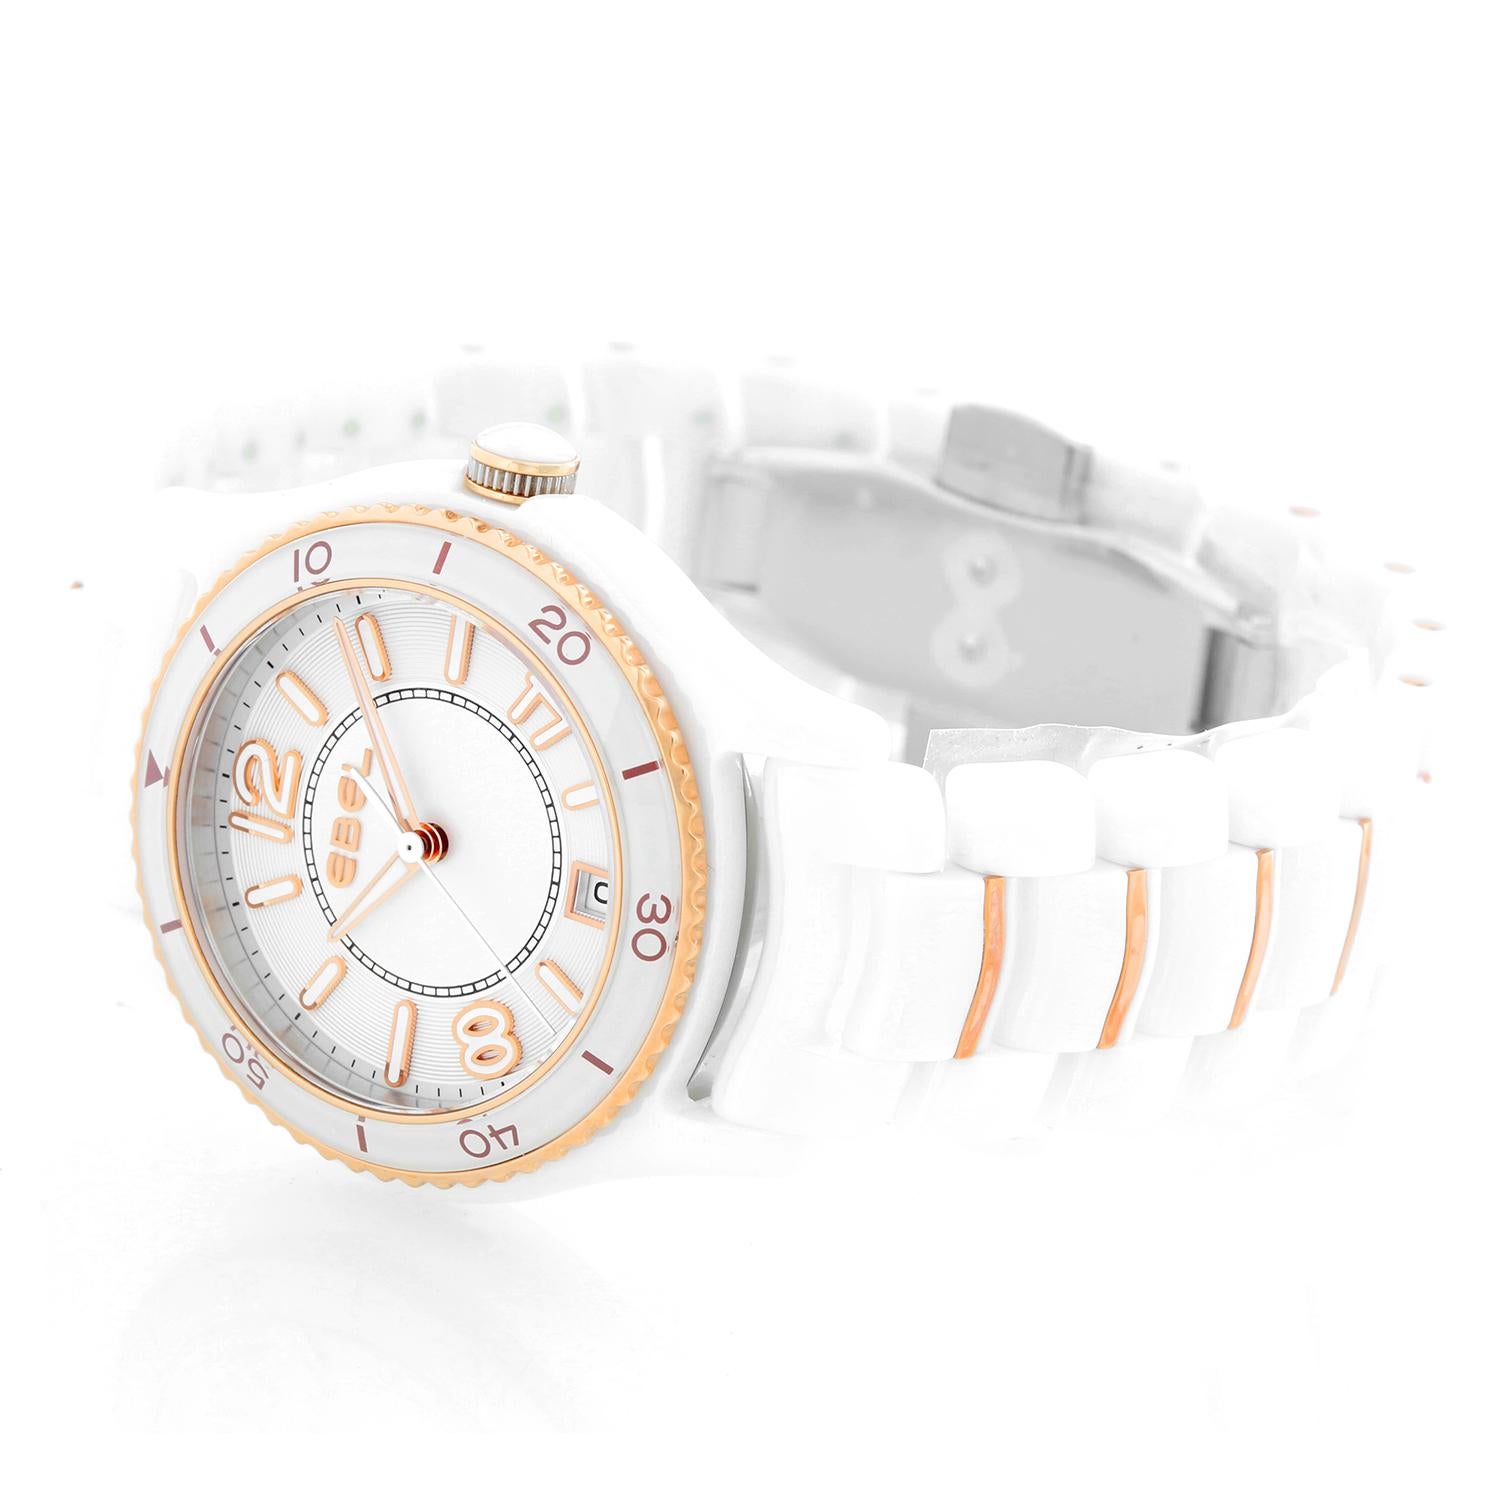 Ebel X-1 Silver Dial White Ceramic Ladies Watch 1216113 - Quartz movement. Scratch resistant sapphire crystal. White ceramic case, uni-directional rotating 18K rose gold bezel with a white ceramic top ring ( 34 mm) . Silver dial with luminous rose